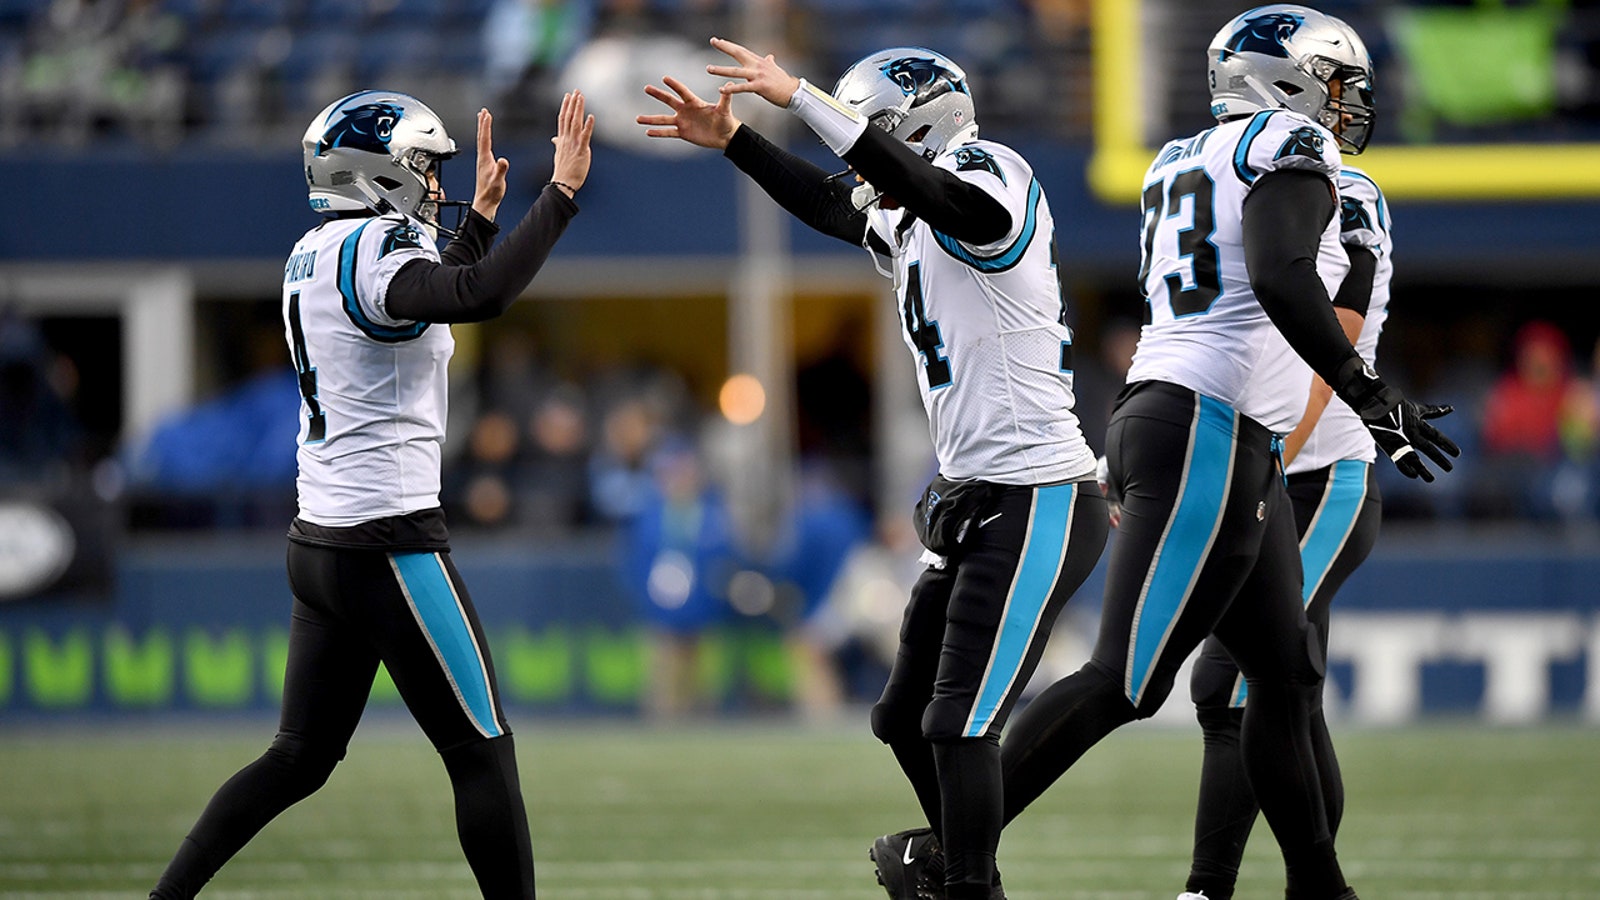 Panthers rush for 223 yards to beat the Seahawks 30-24